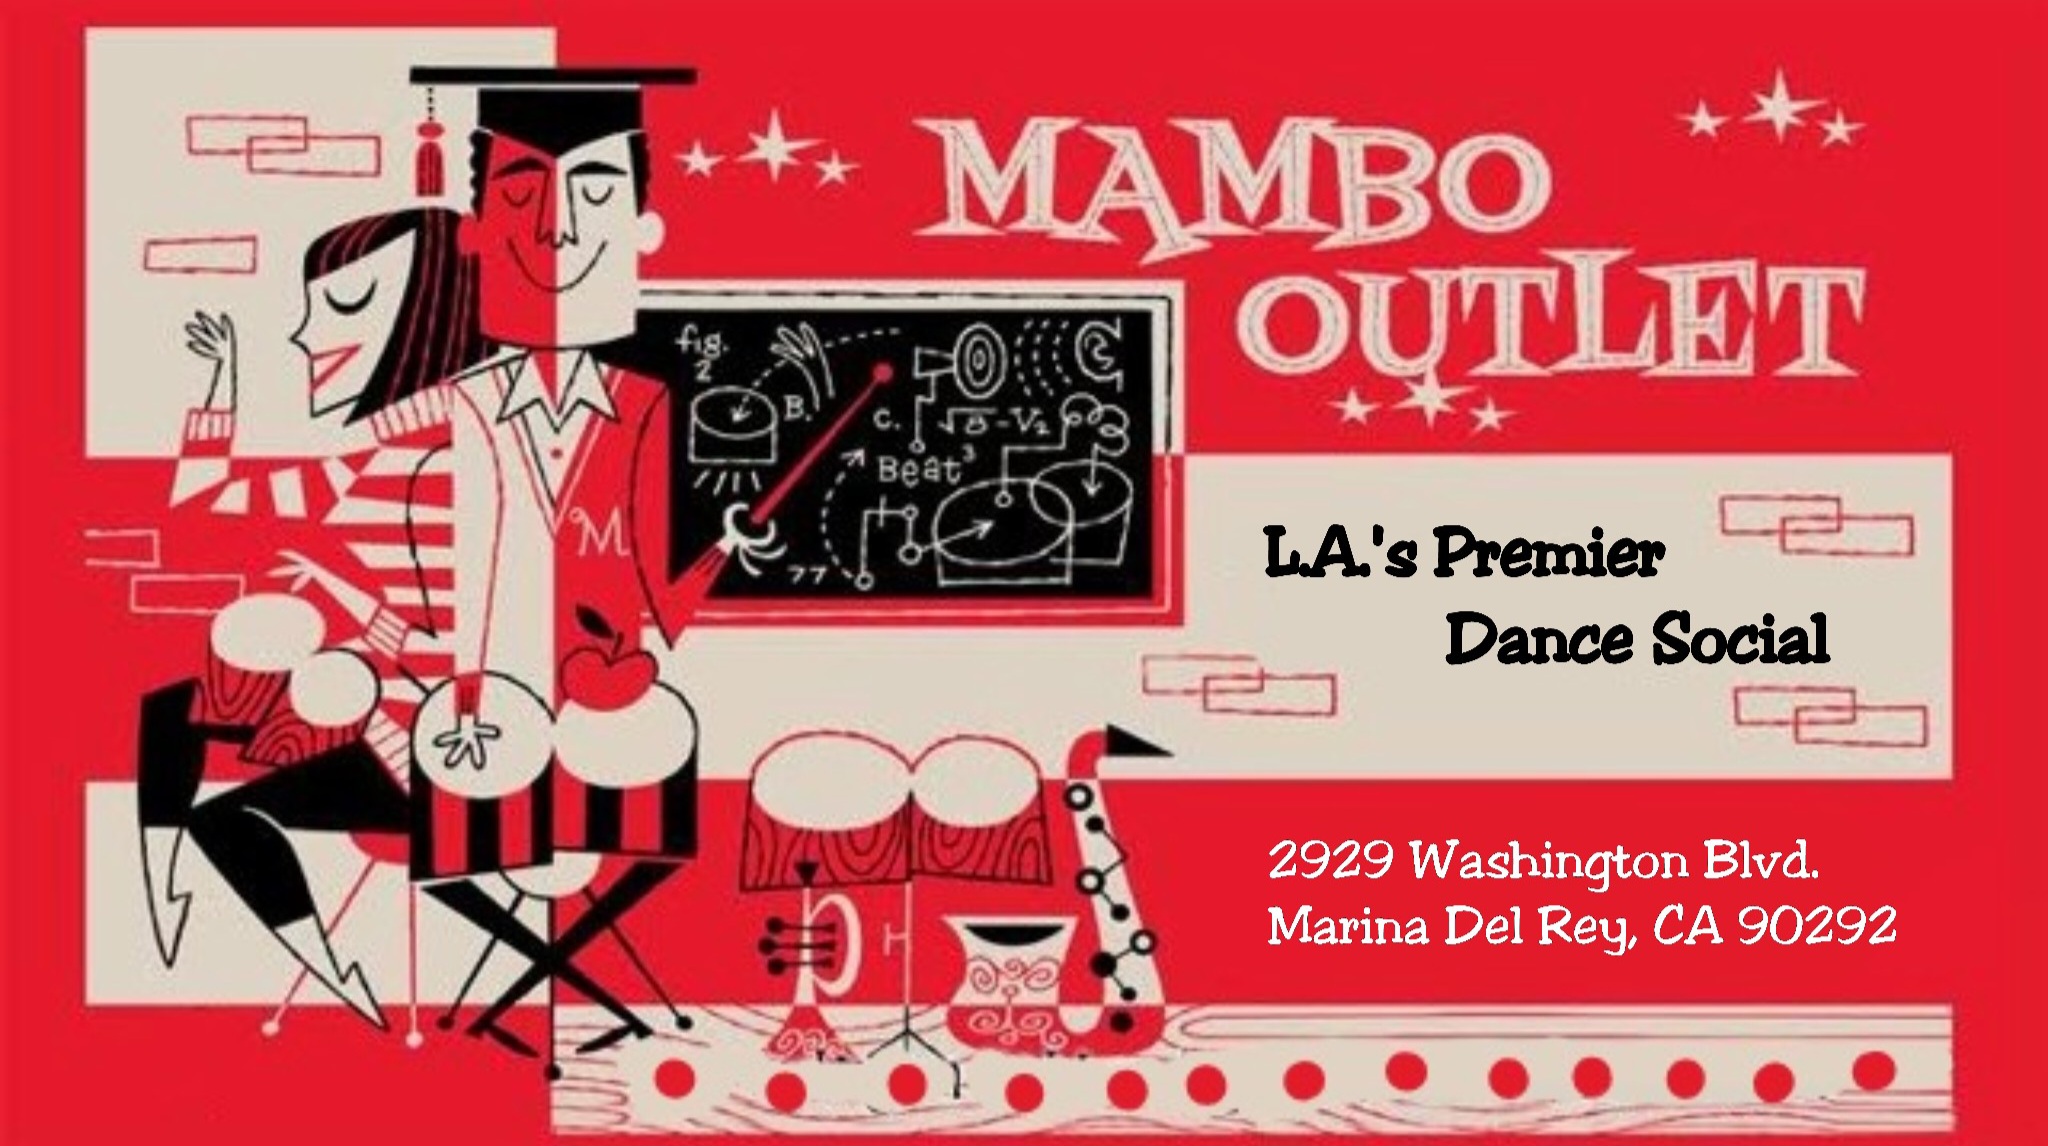 The Mambo Outlet – Abraham & Michelle 2-HR Workshop – February 18, 2023